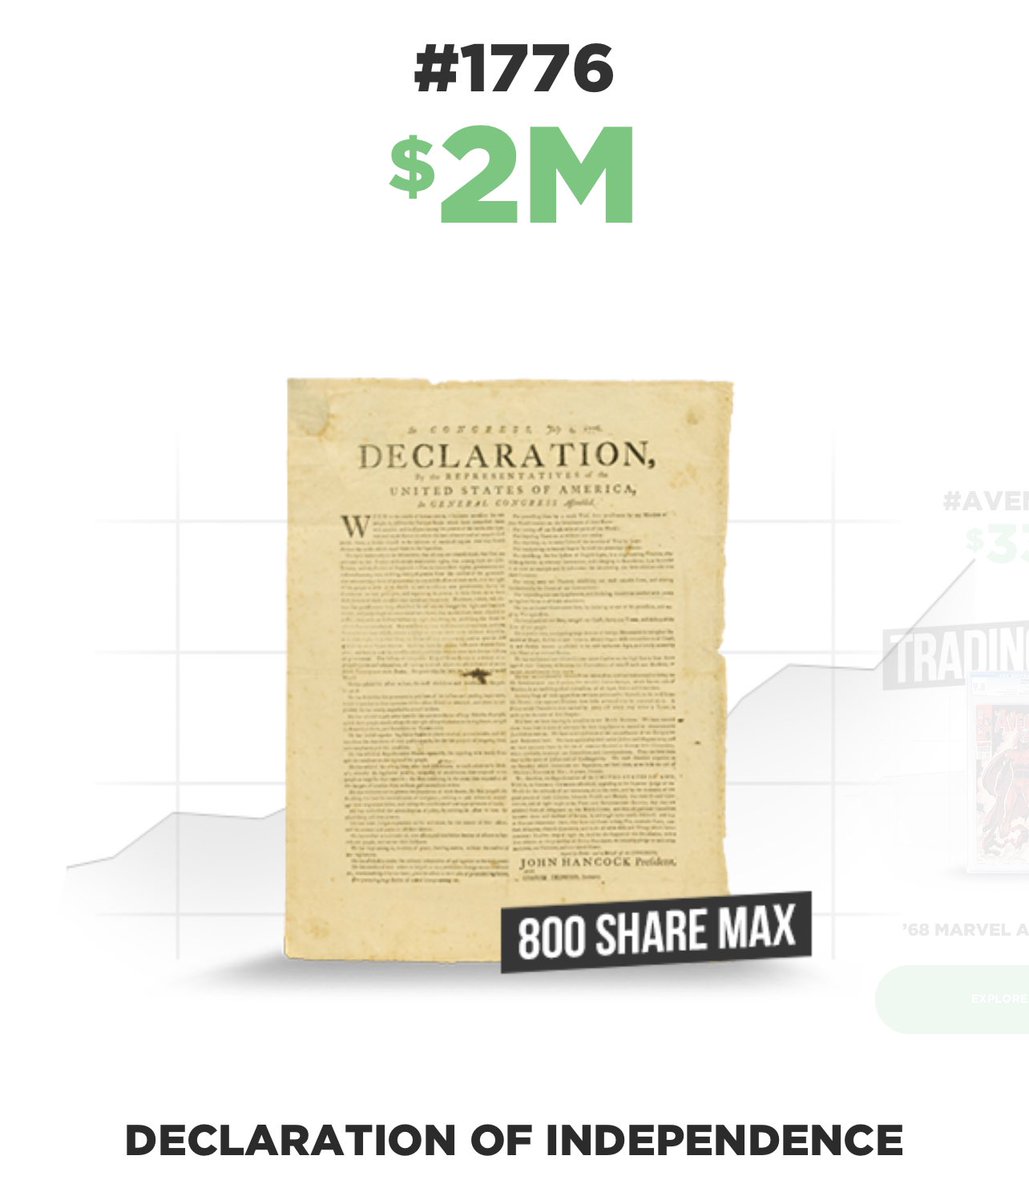 On the heels of a copy of the Constitution selling for $43 million last night, @OnRallyRd offers shares of a copy of the Declaration of Independence. 

Shares at $25 a share, based on a $2M valuation, sell out in an hour, 10 minutes from 5,546 investors.

#Advisor https://t.co/Rm4vUmVNam